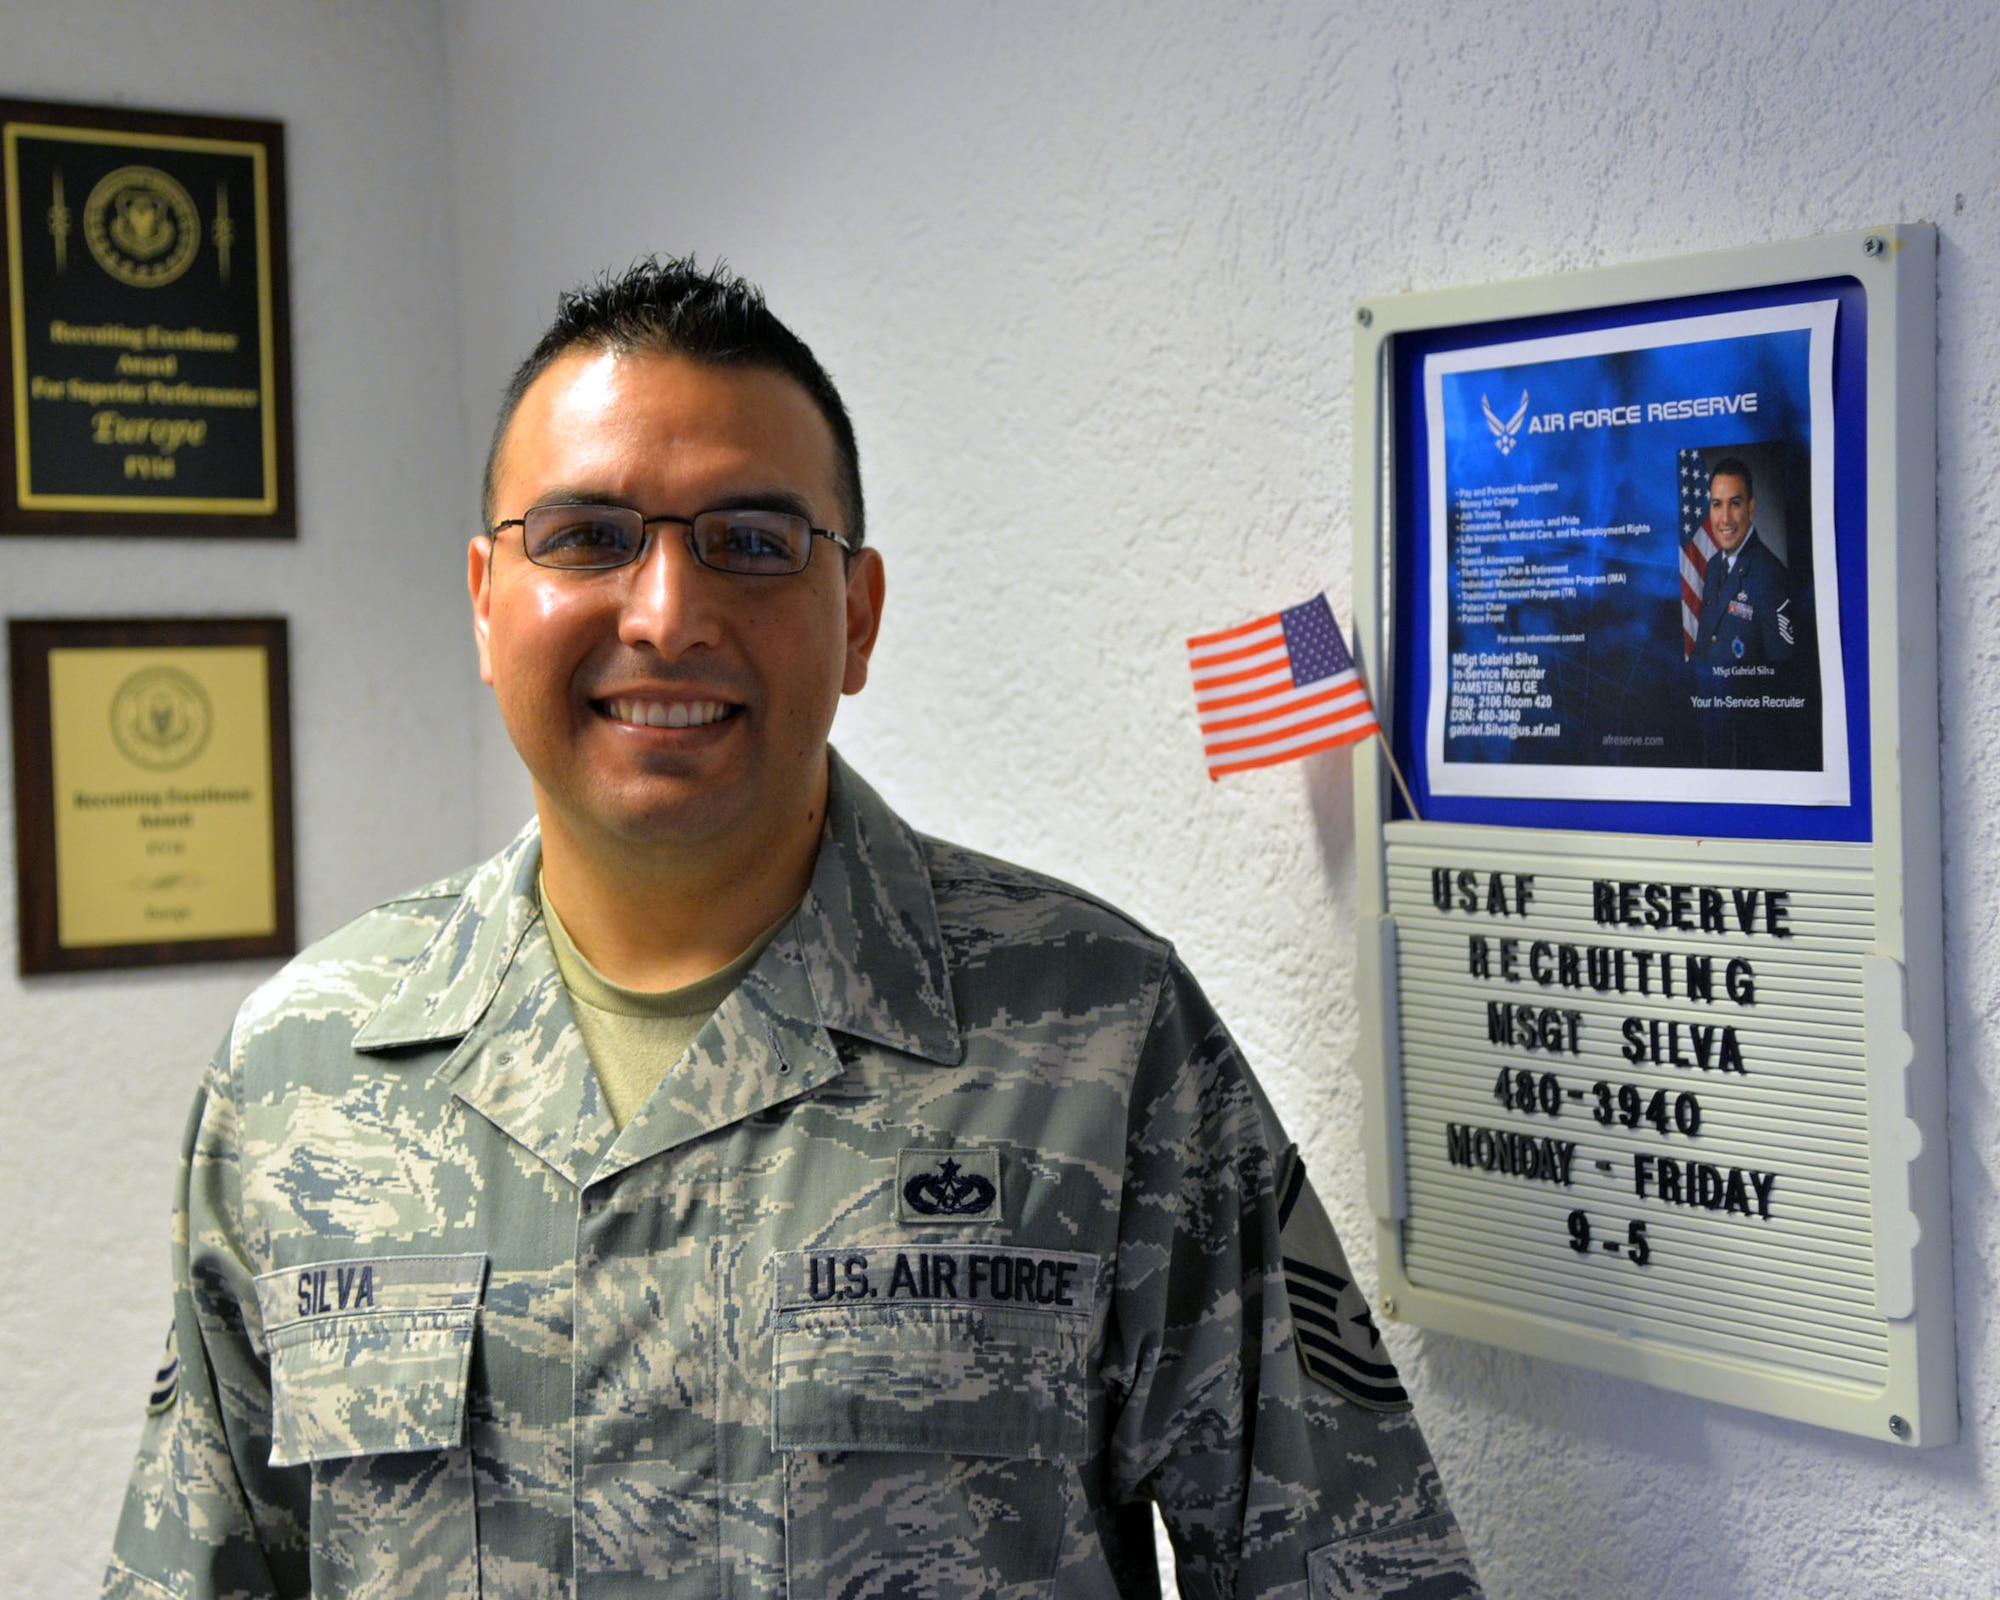 Master Sgt. Gabriel Silva, Air Force Reserve recruiter, can assist Active-Duty Airmen with transferring into the Air Force Reserve. The Palace Chase and Palace Front programs are frequently misunderstood, but the Reserve recruiting team on Ramstein Air Base can assist. (U.S. Air Force photo by Staff Sgt. Tory Patterson)